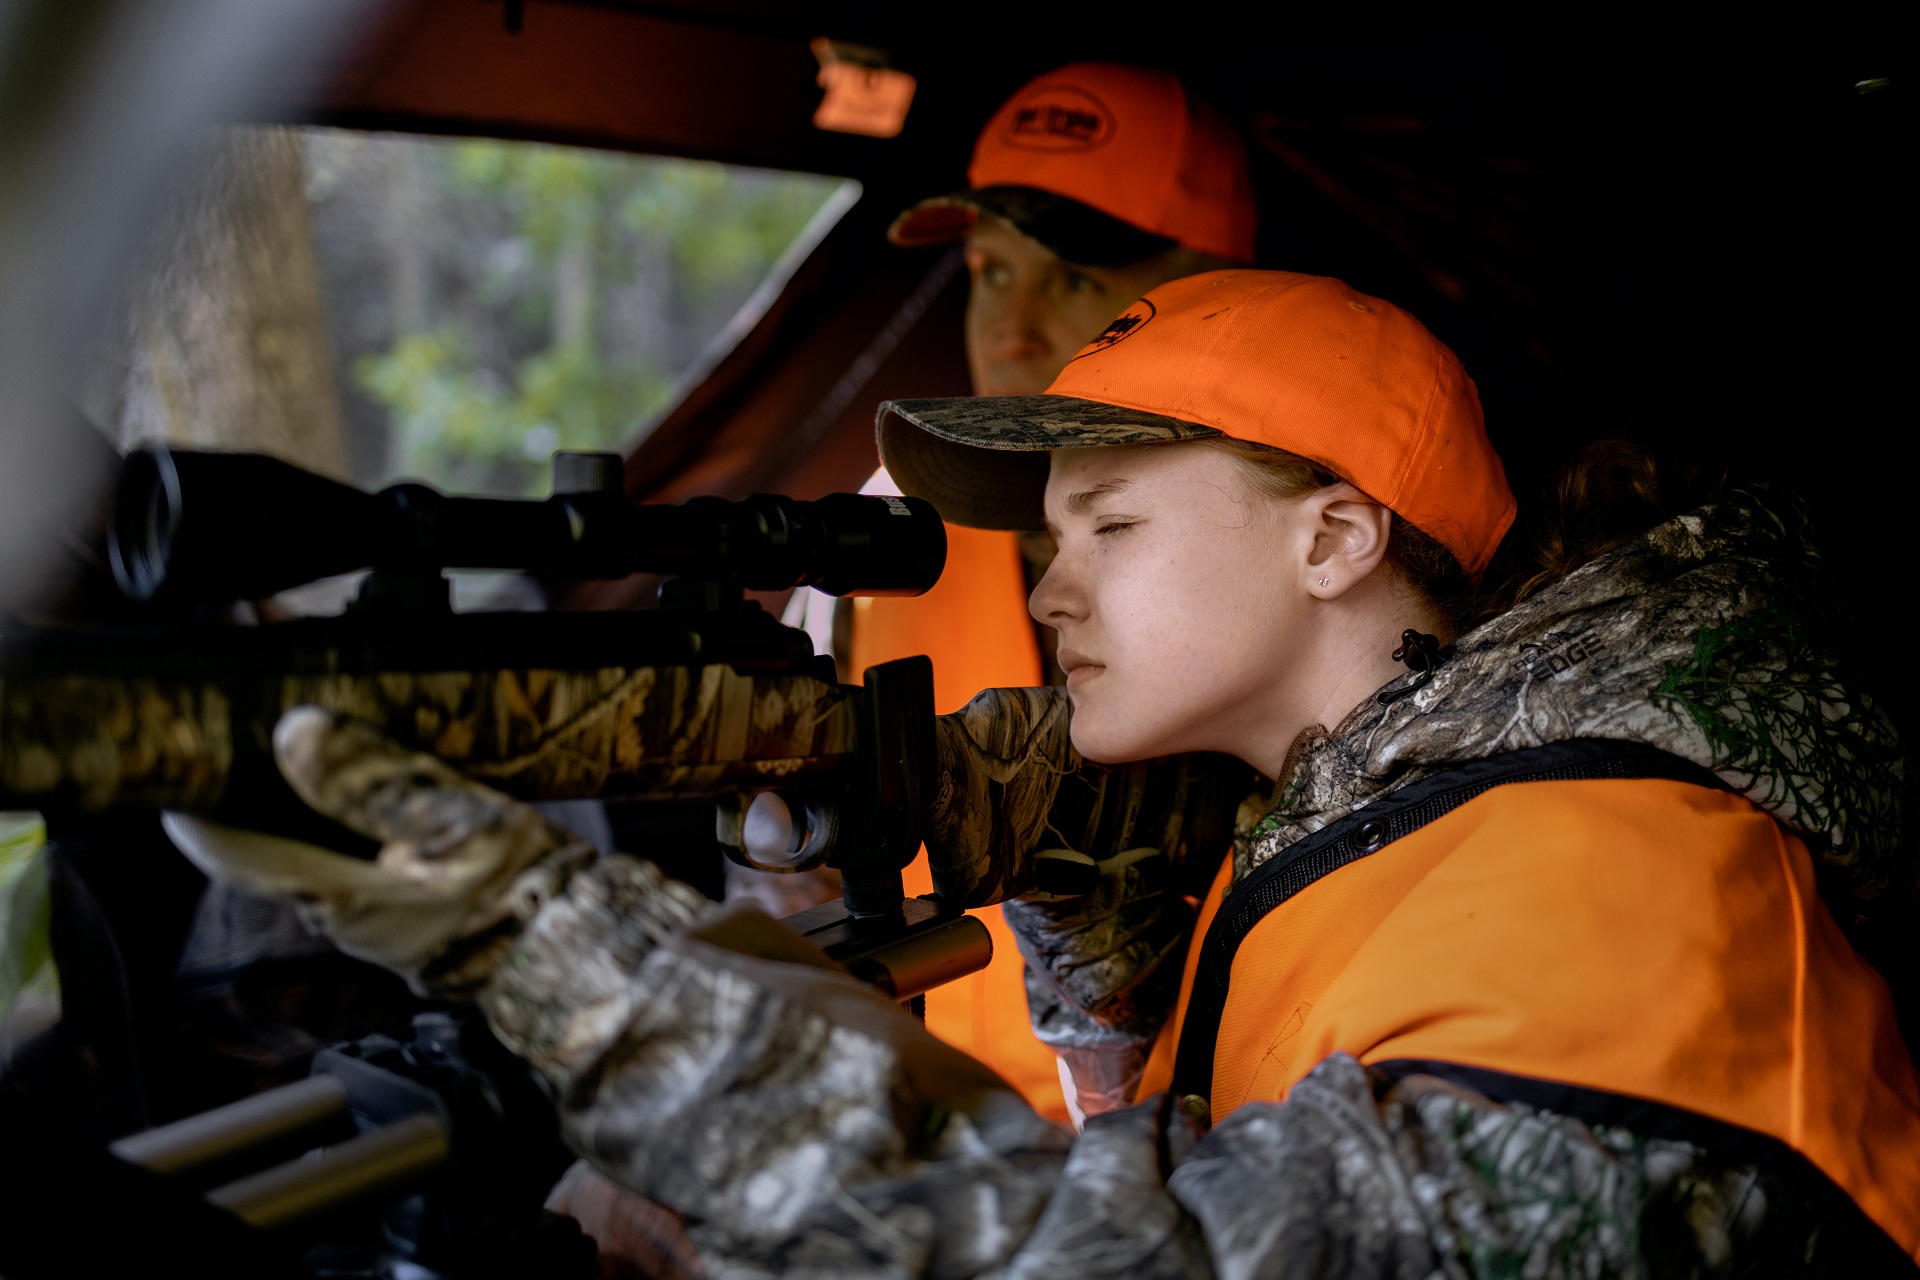 A father looks on as his son take aim from a hunting blind